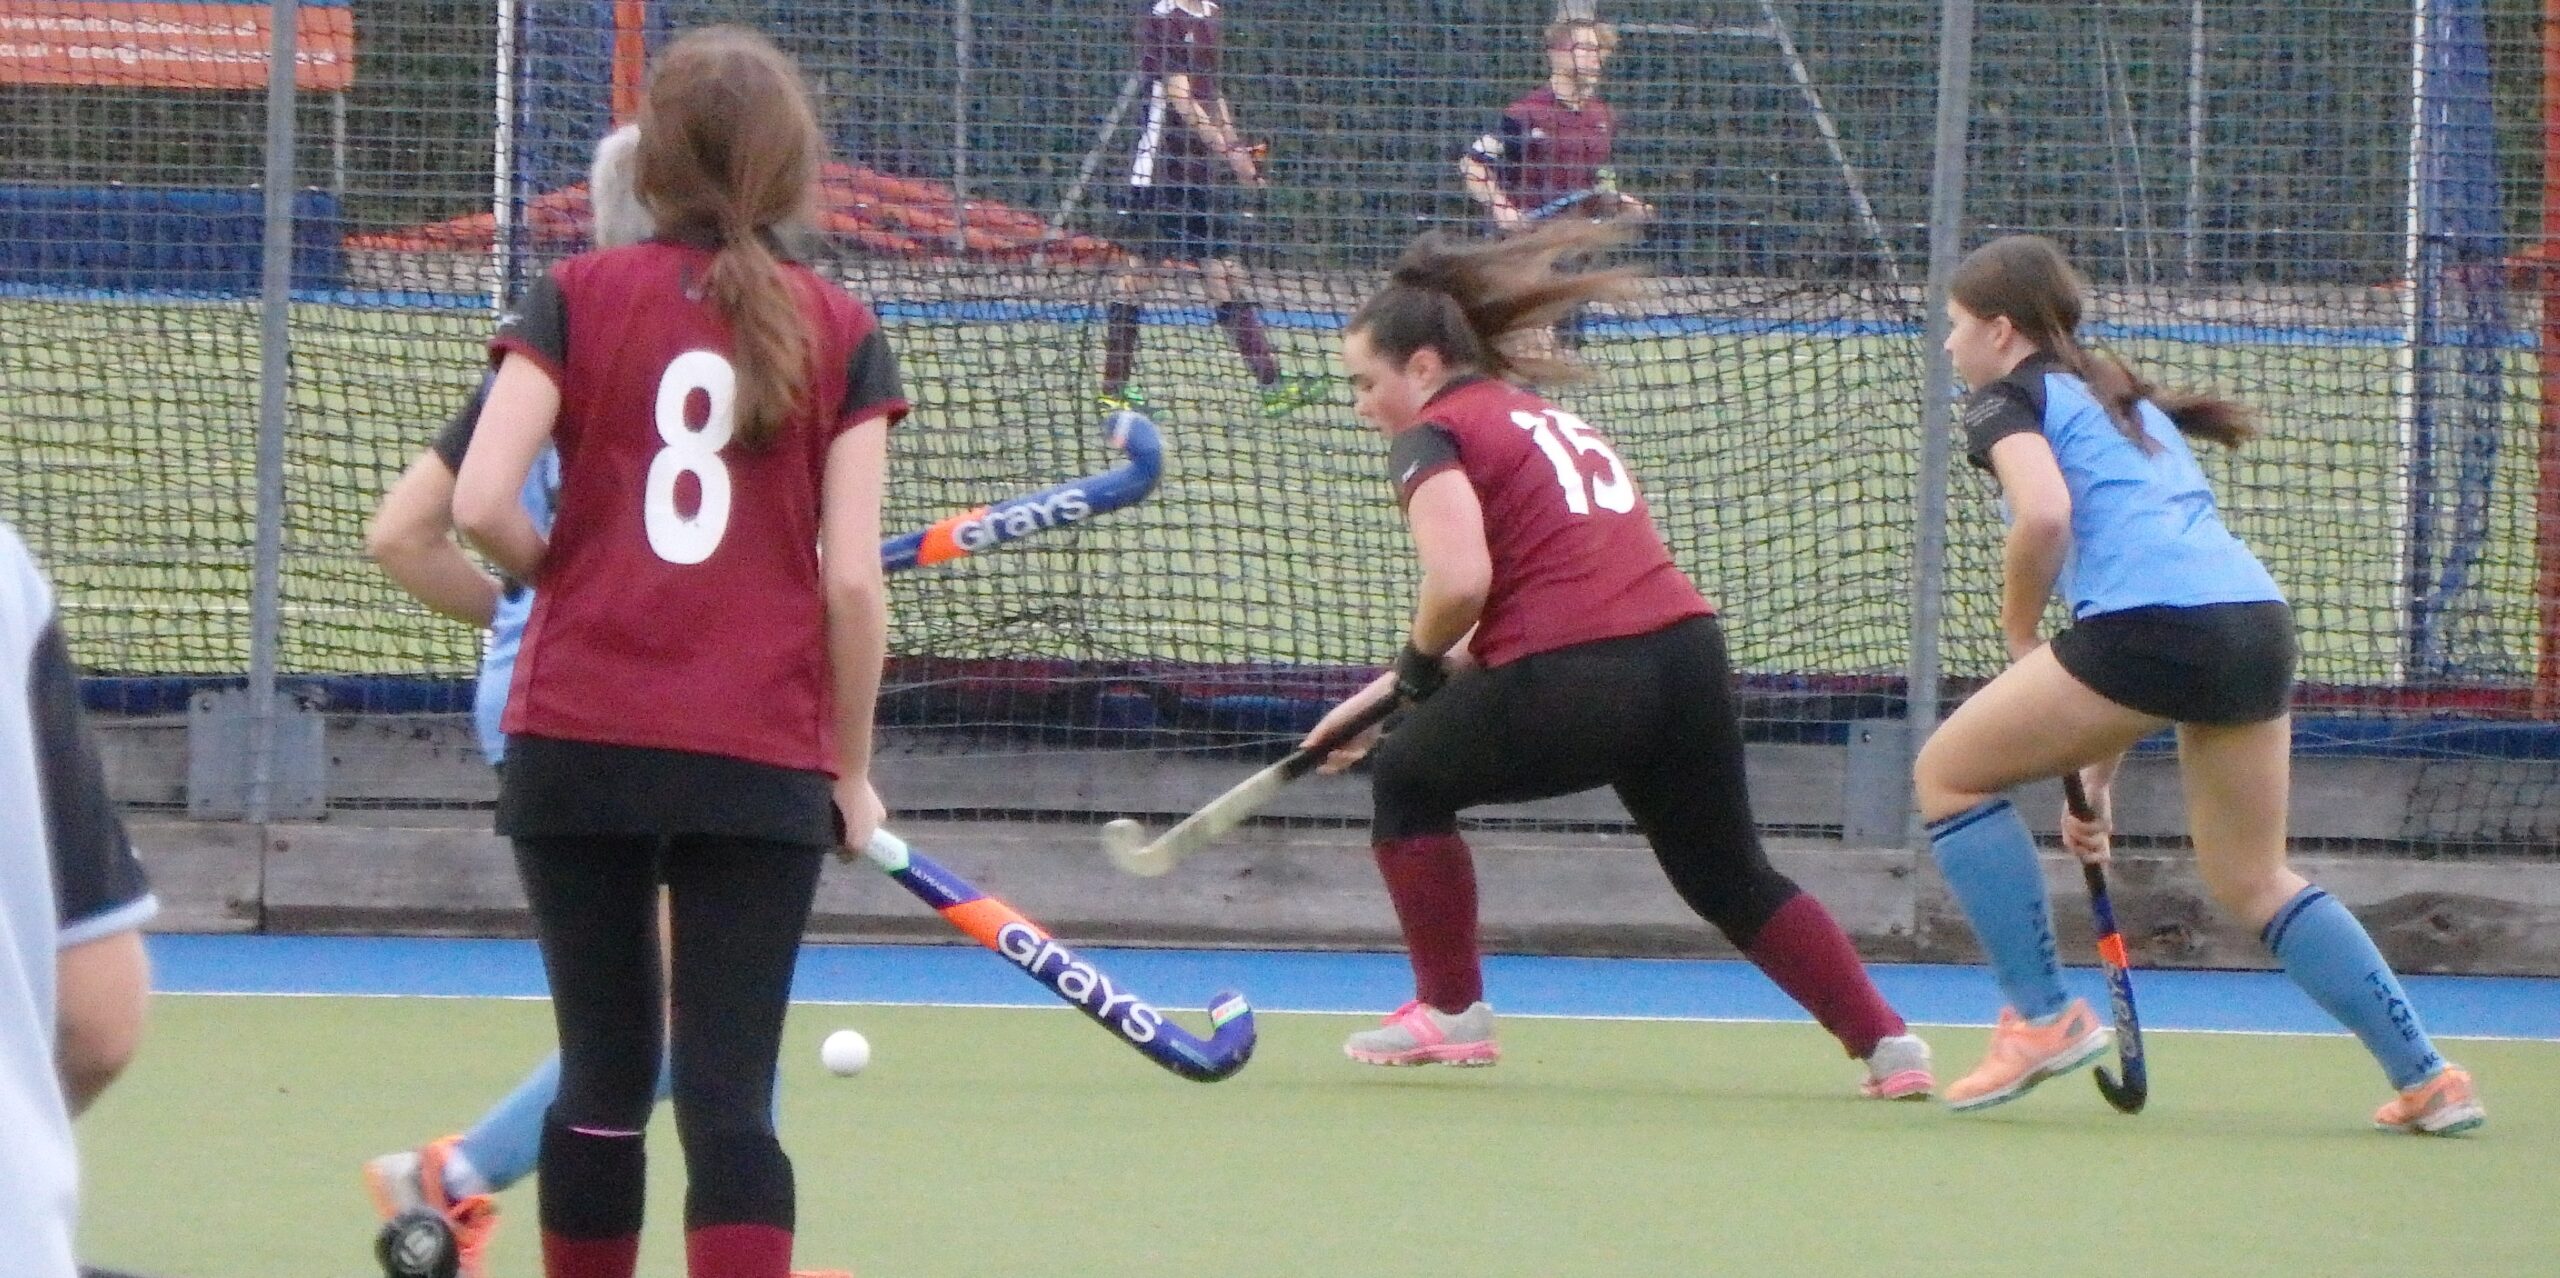 Ladies’ 8s beat Thame at home